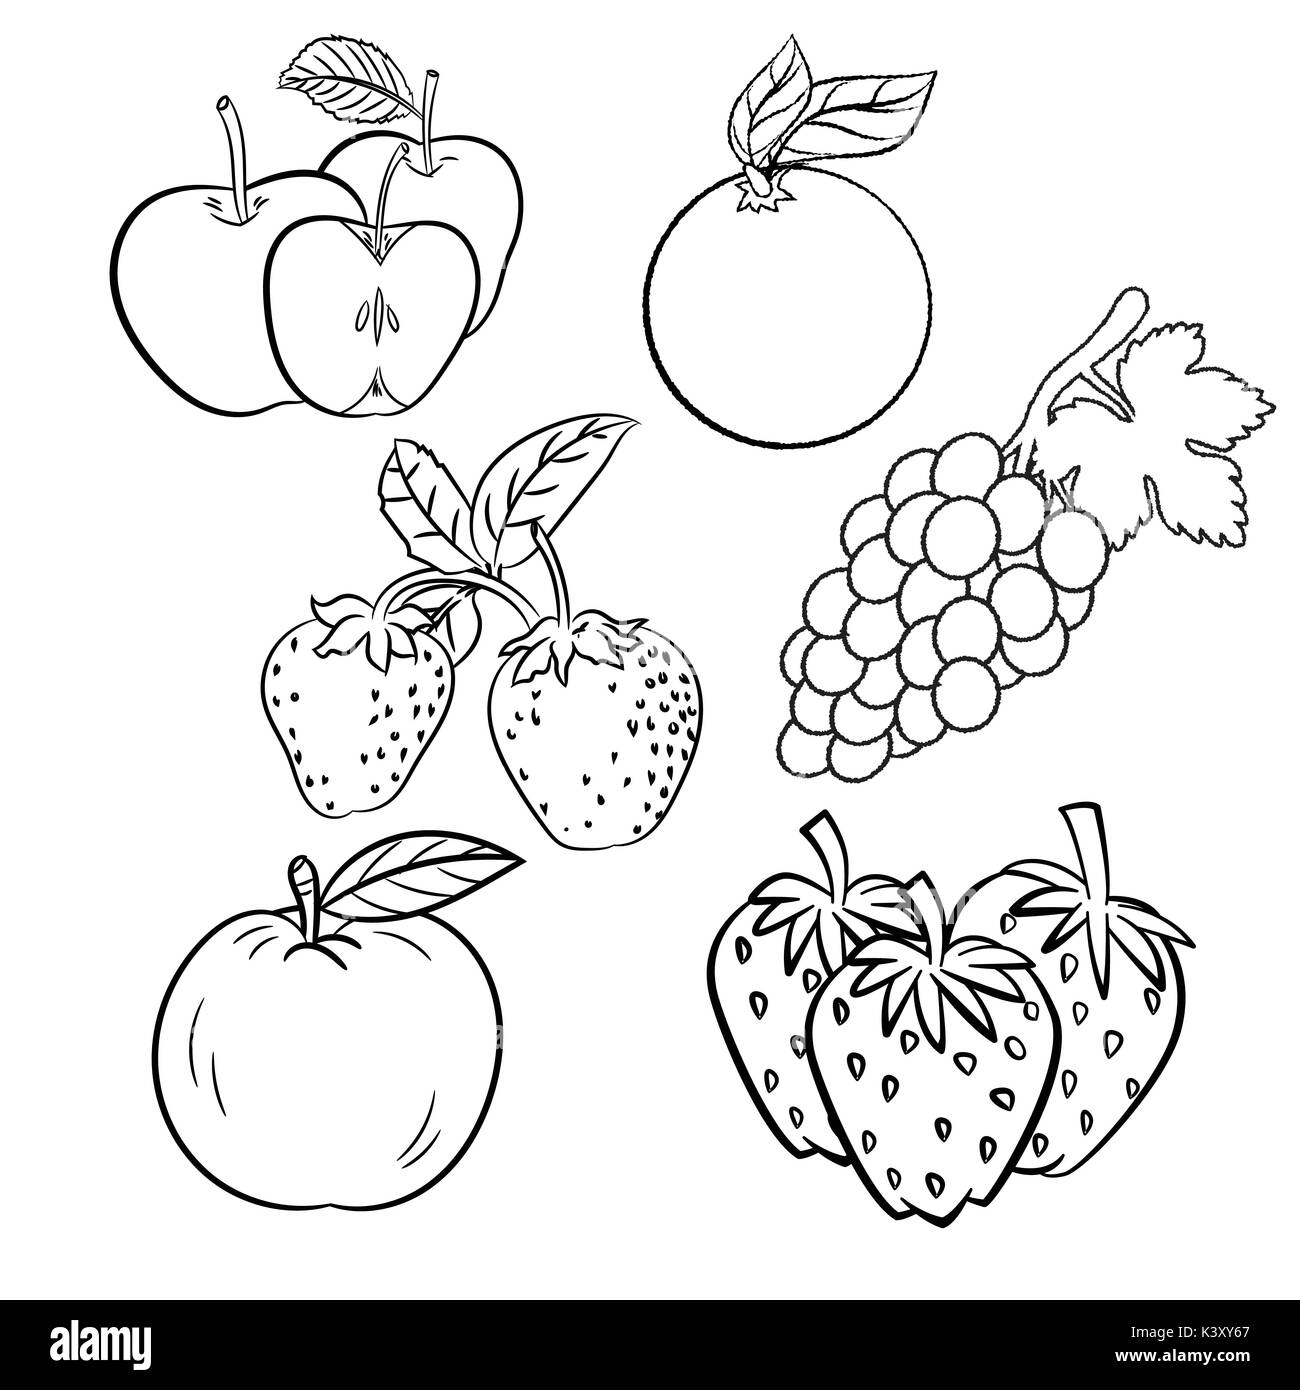 Hand drawn set of different fruits with apple, strawberry, orange and grape. Vintage hand drawn sketch, vector illustration. Linear graphic. Stock Vector